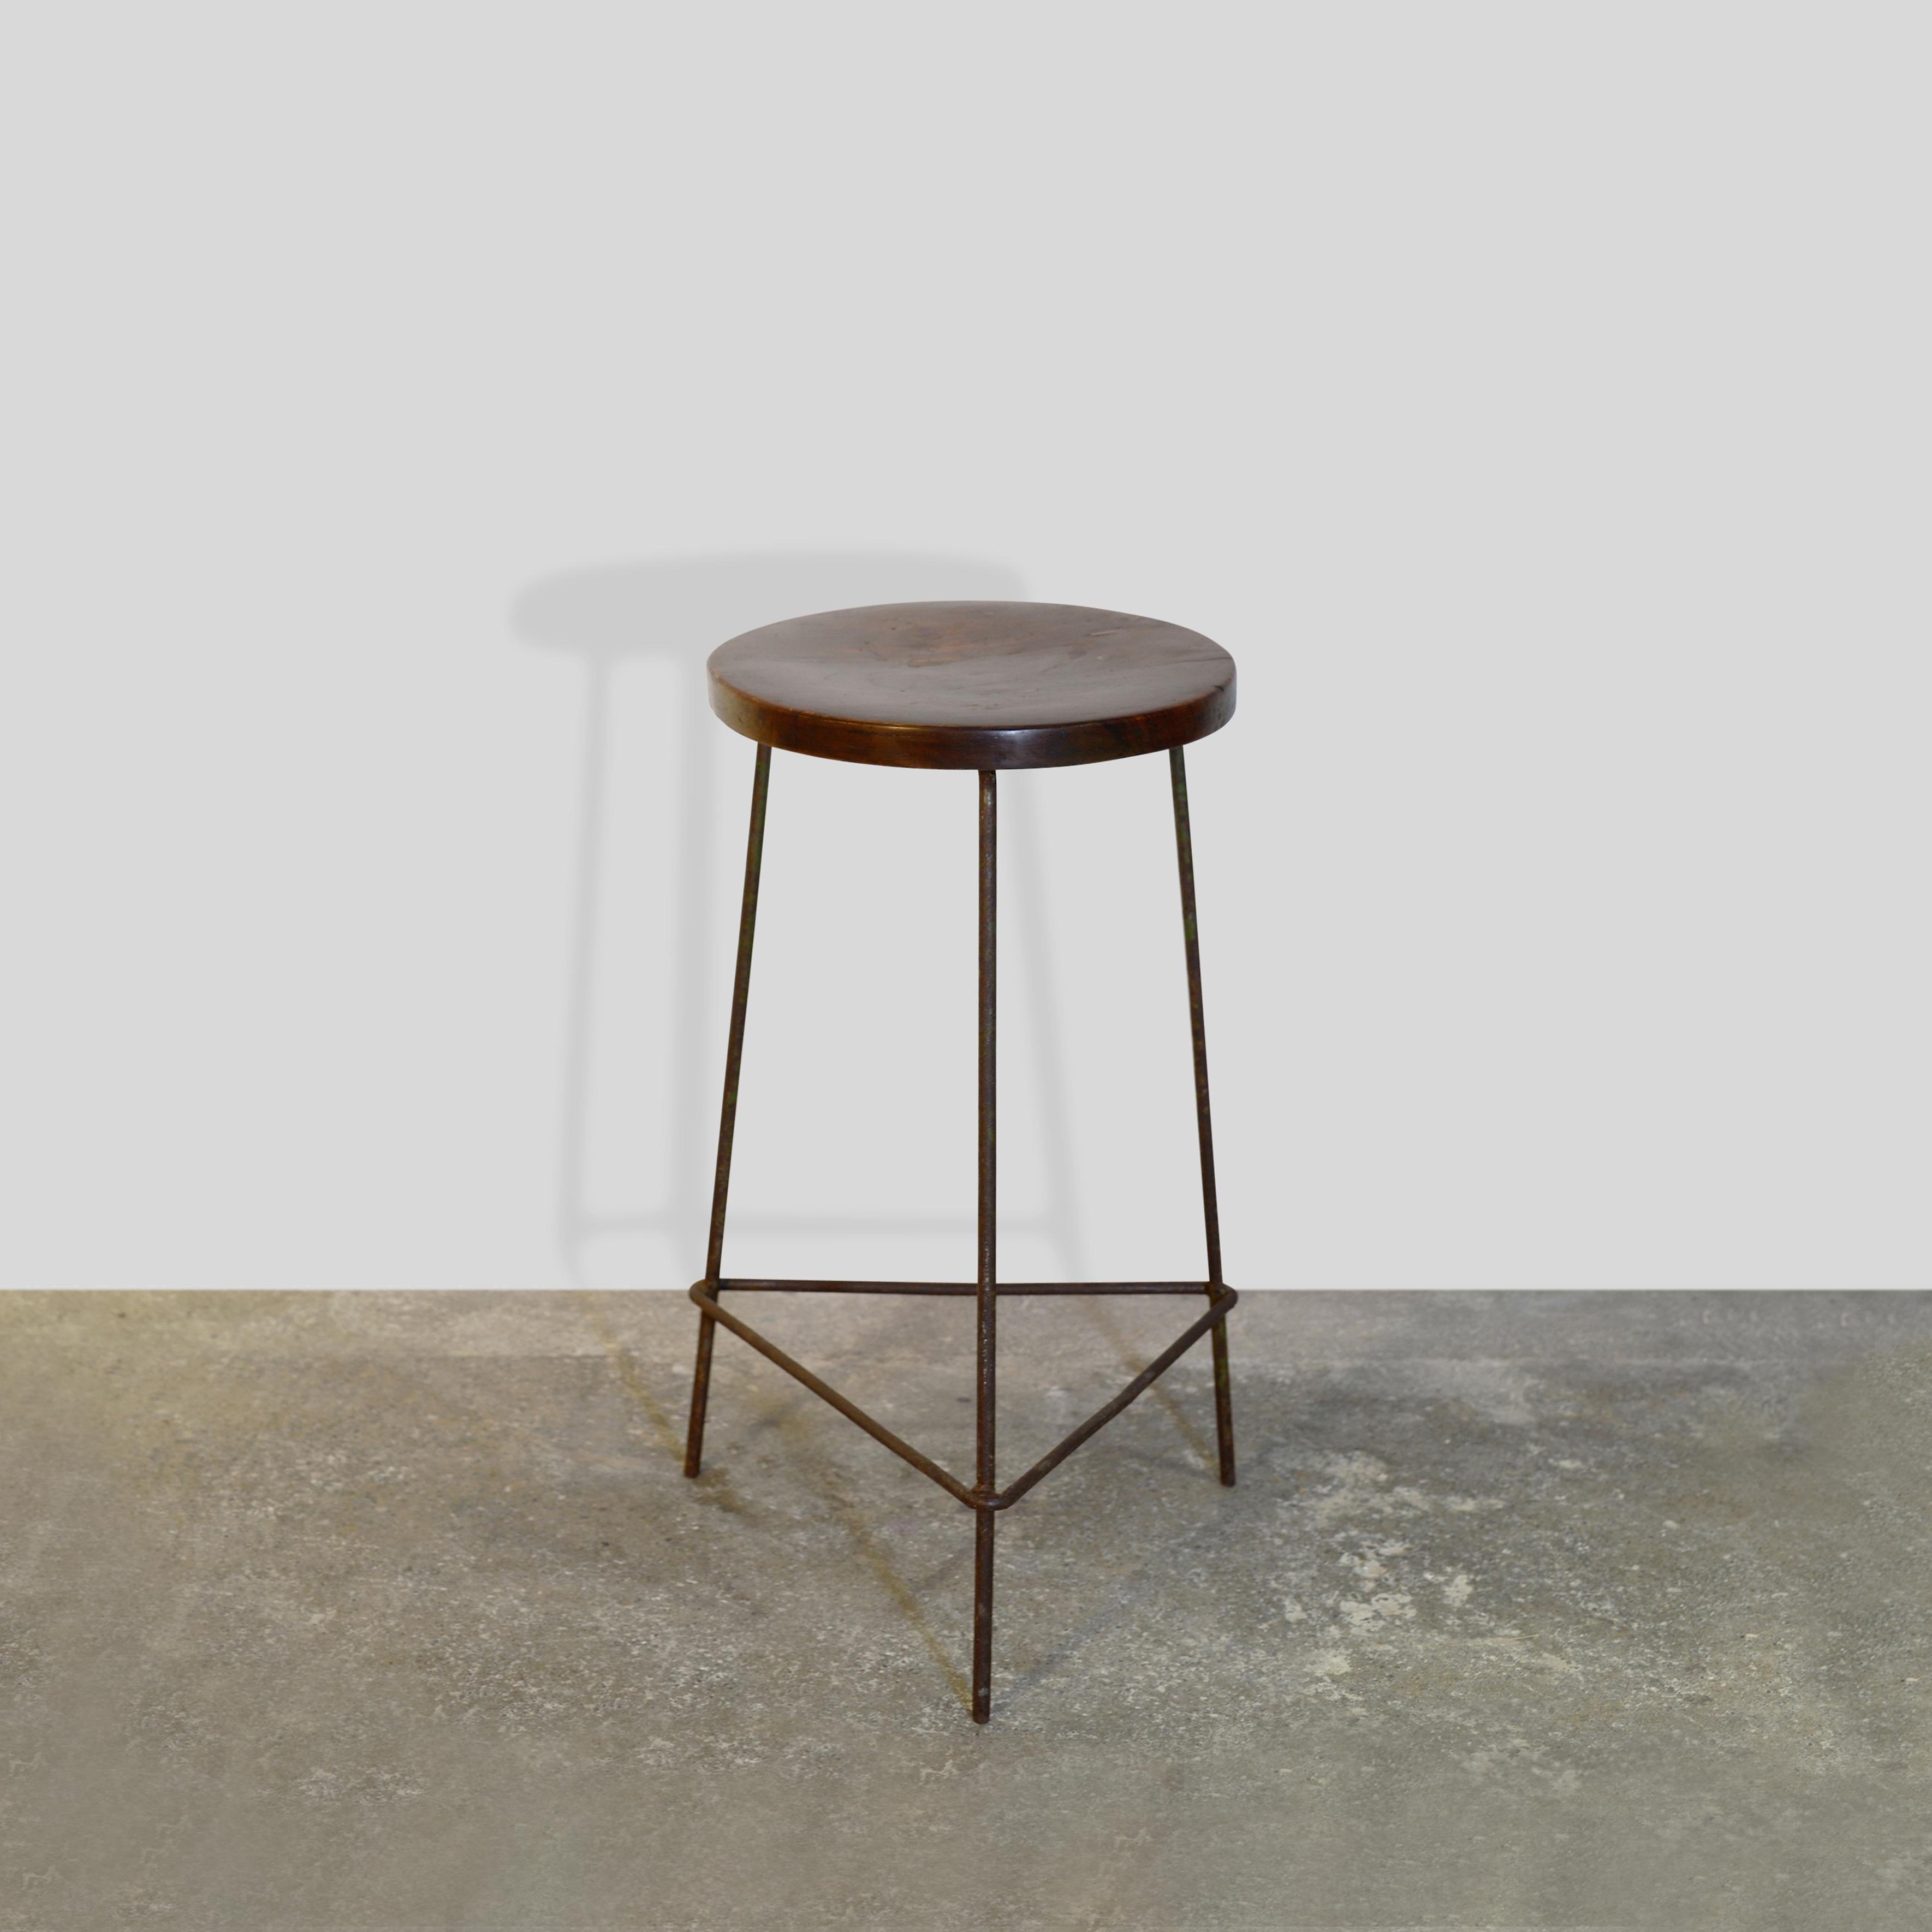 This stool is not only a fantastic piece, it’s a rare collectors item. It is raw in its simplicity, embodying an expressing a nonchalance. 

It is finally a historical piece from an UNESCO World Heritage site, done by the most important architects